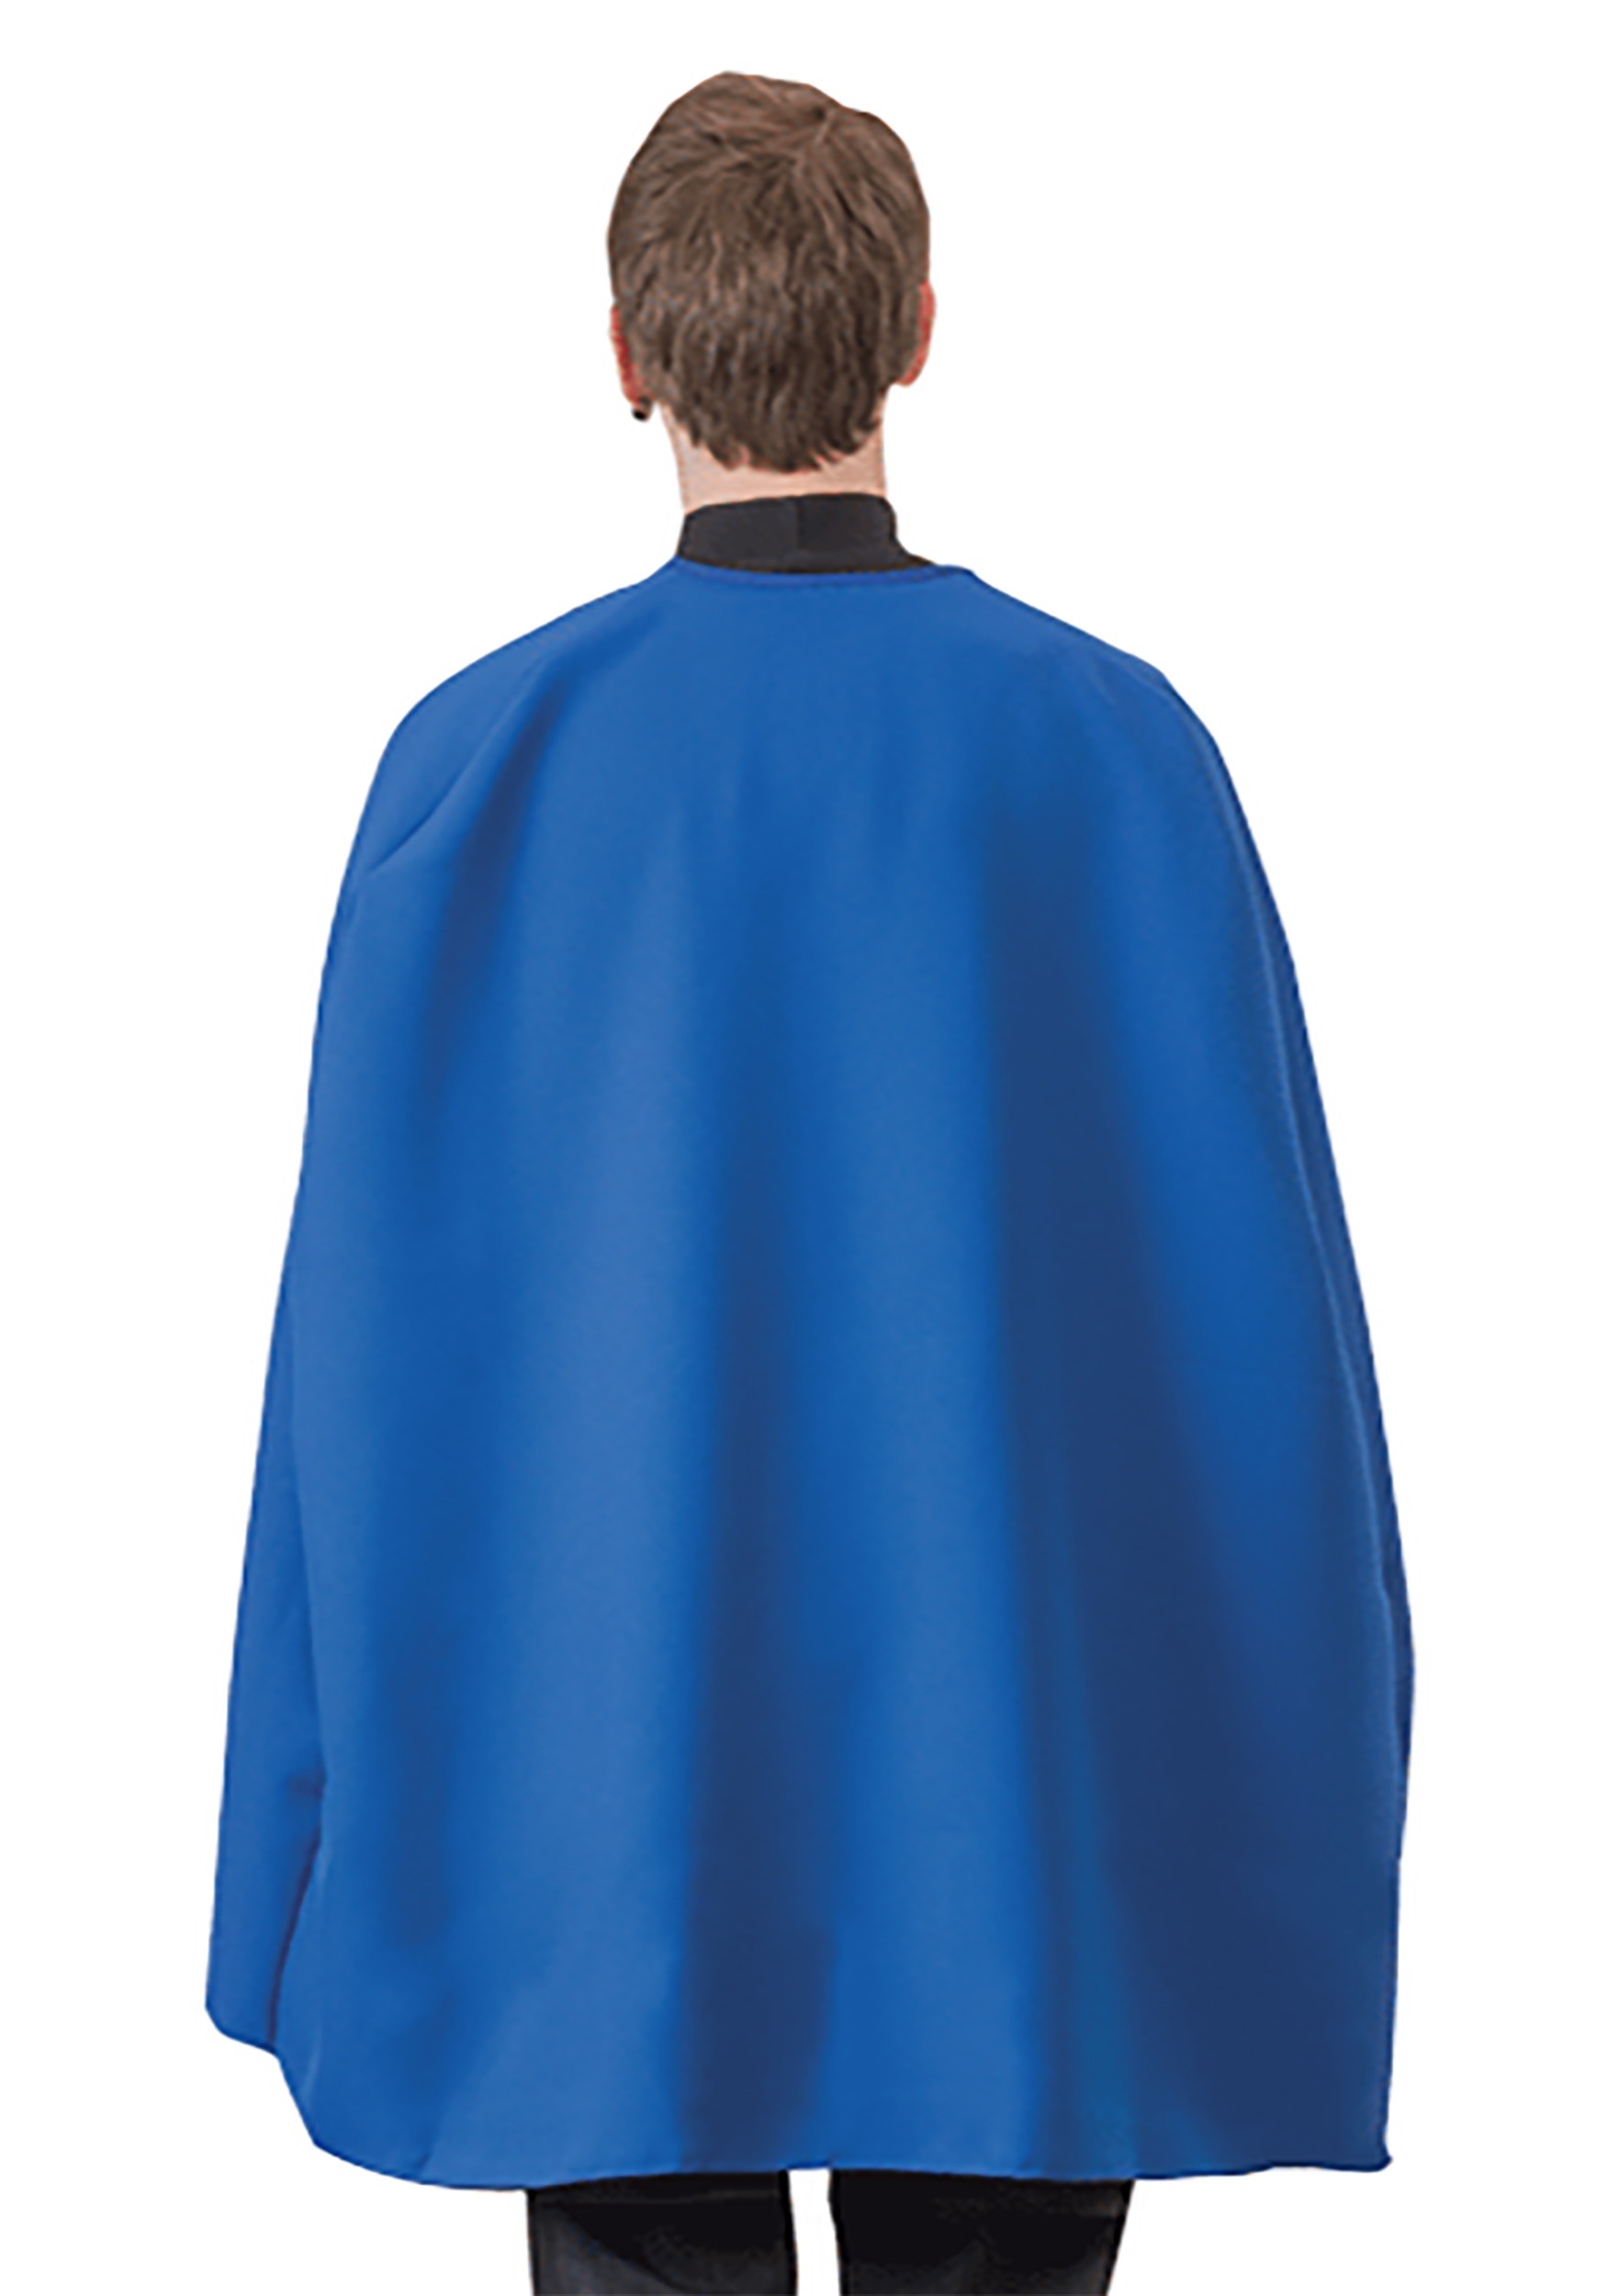 with mask 1 x Superhero Cape /&Mask One Size Adult costume blue Teen